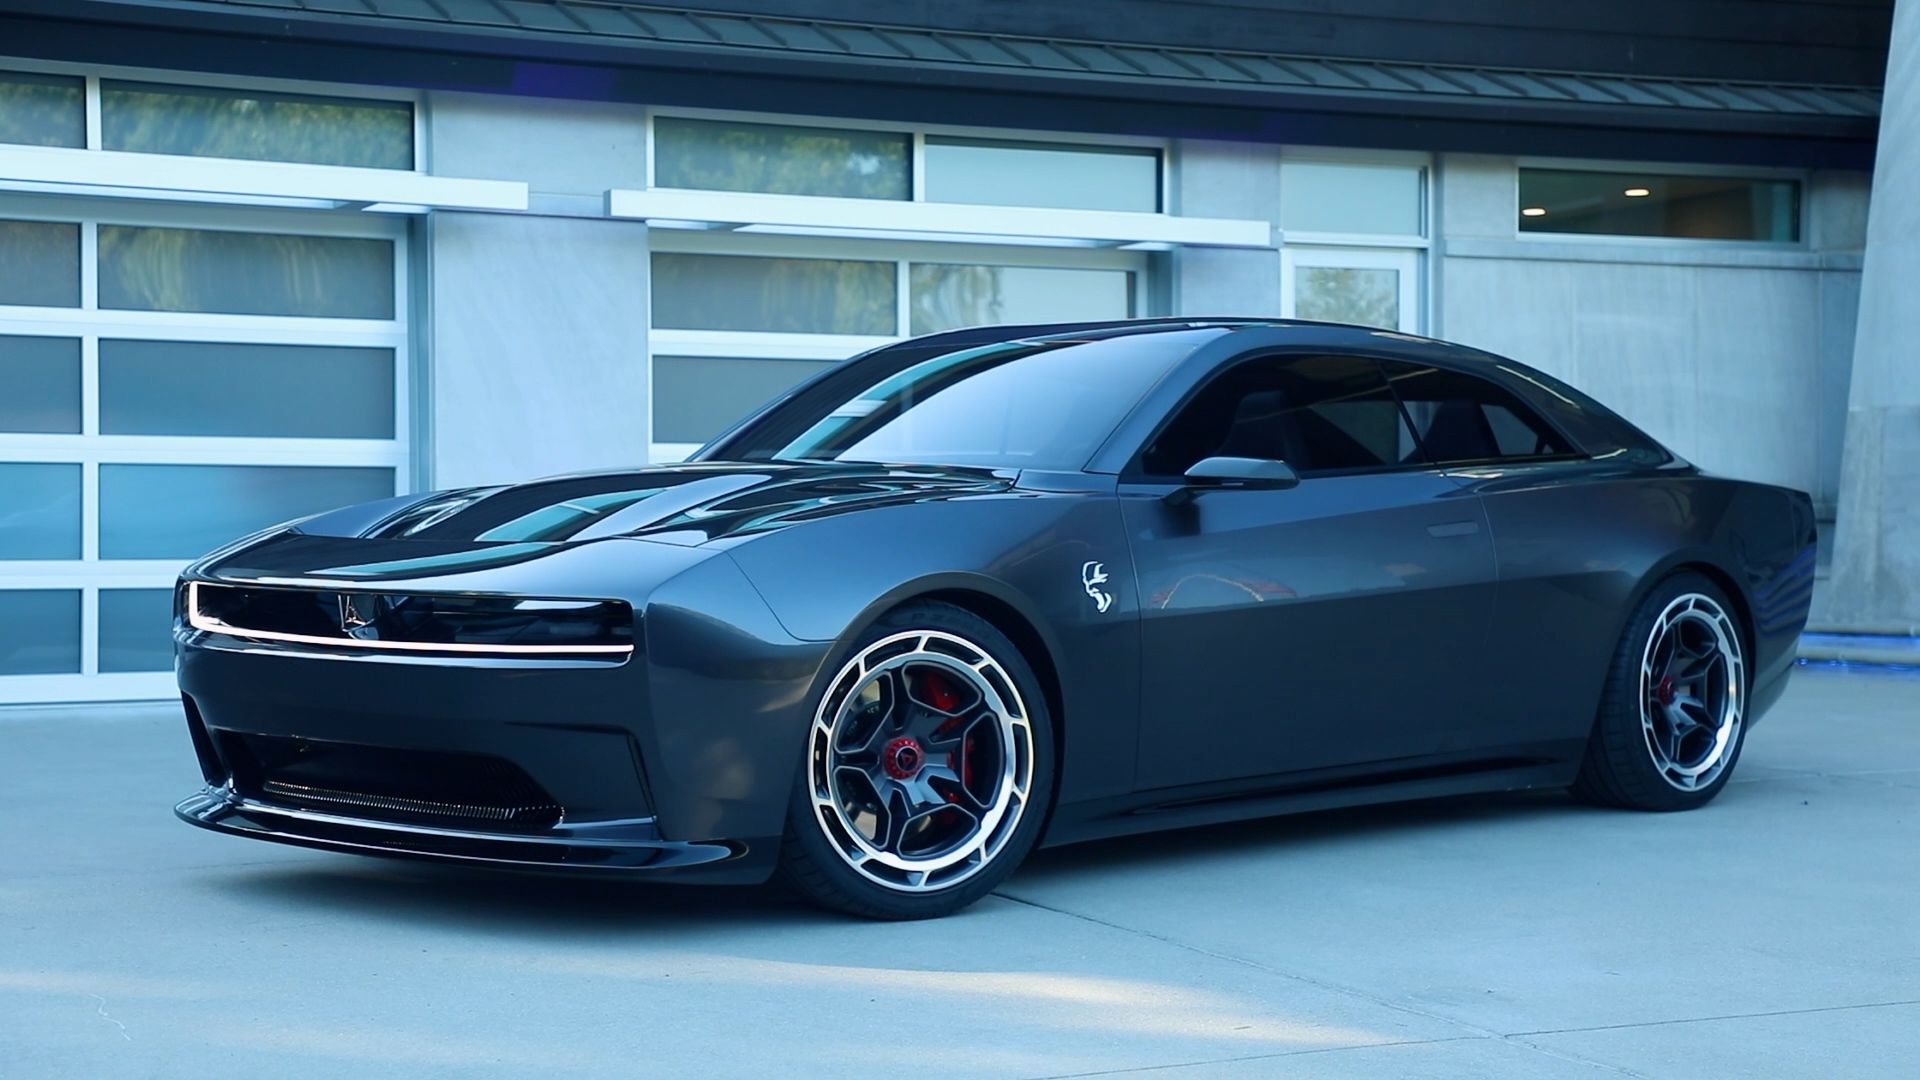 Dodge’s All-New Charger Takes Electric Muscle Cars to the Next Level